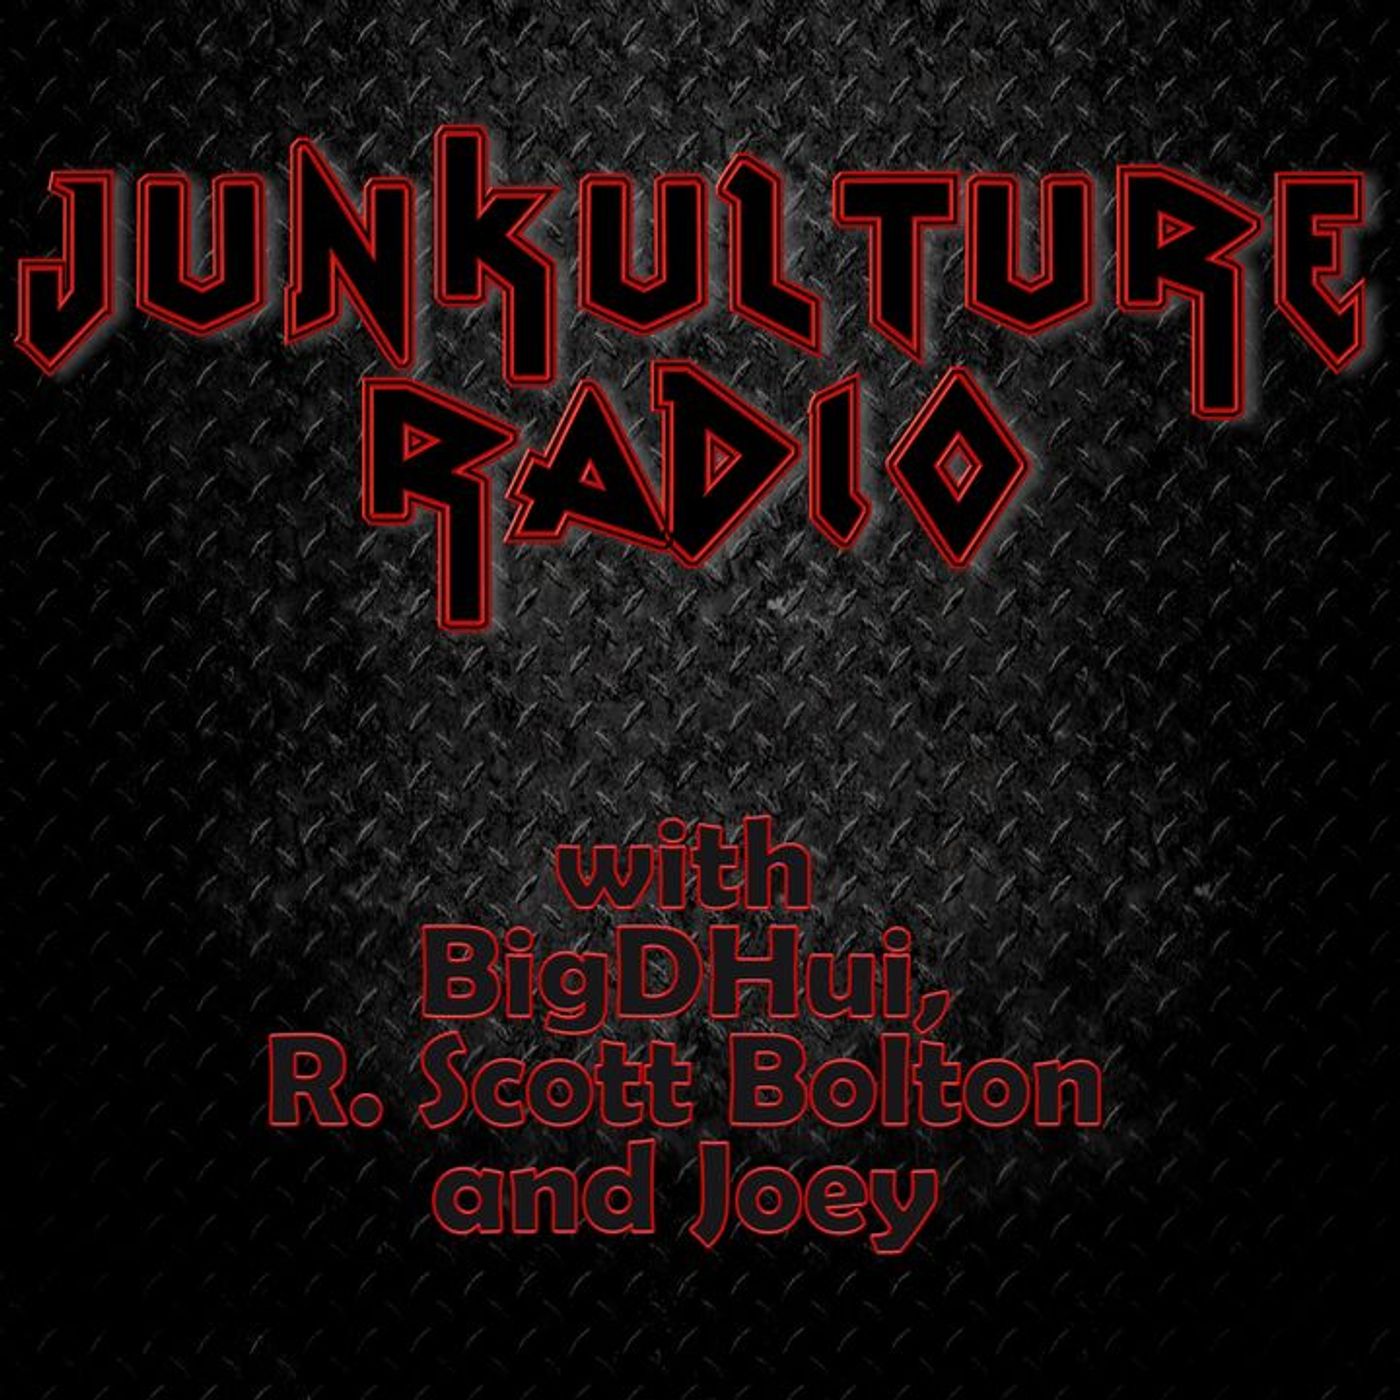 Joey and Scott - Together Again | JUNKULTURE RADIO (07/13/21)